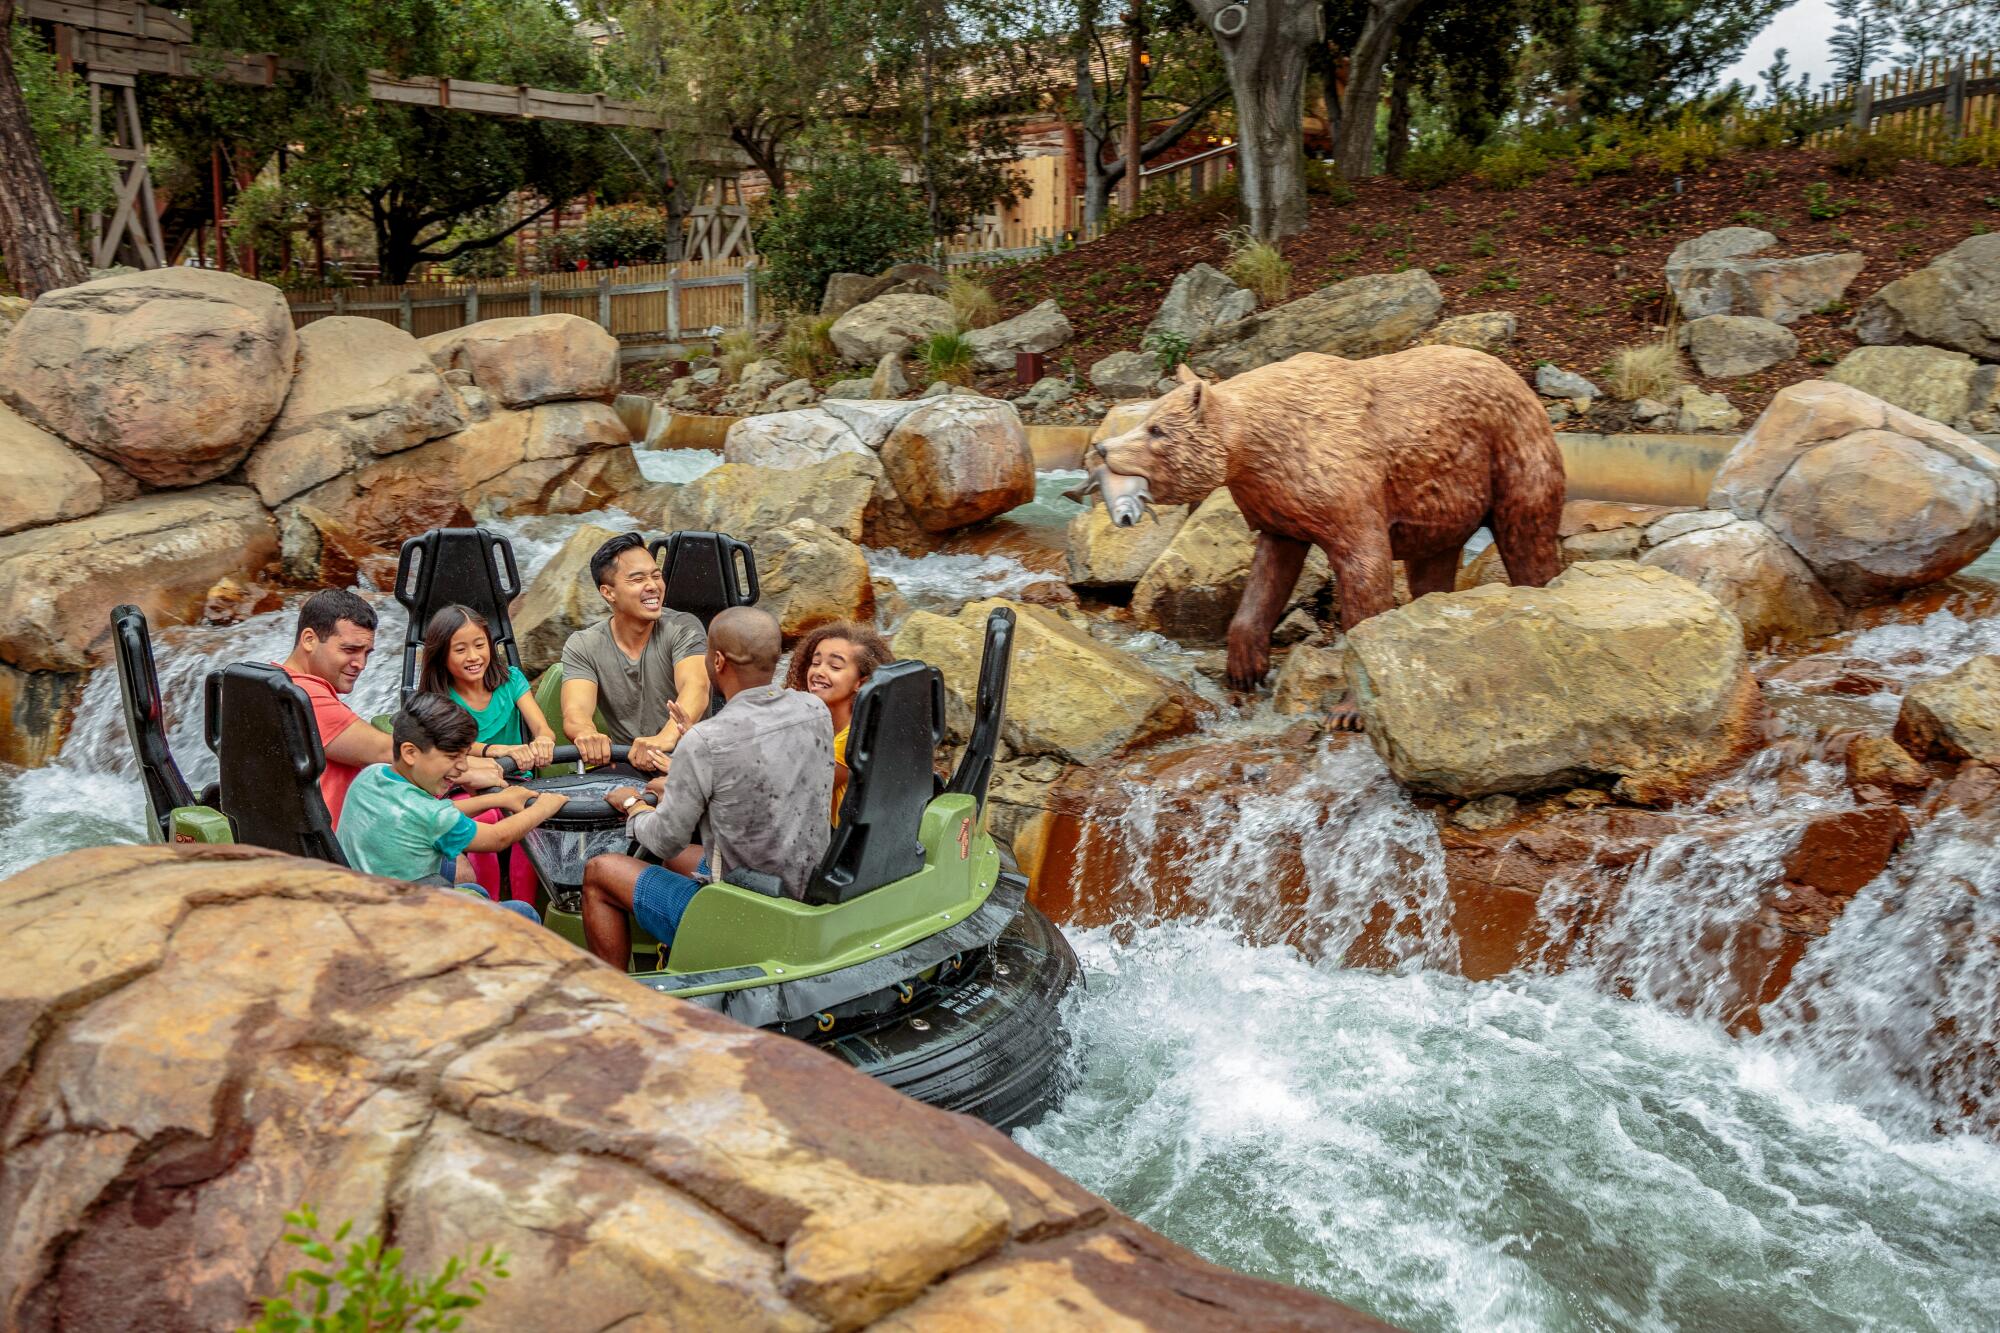 Animatronic bears loom over theme park-goers on a boat traveling among rocks and rapids